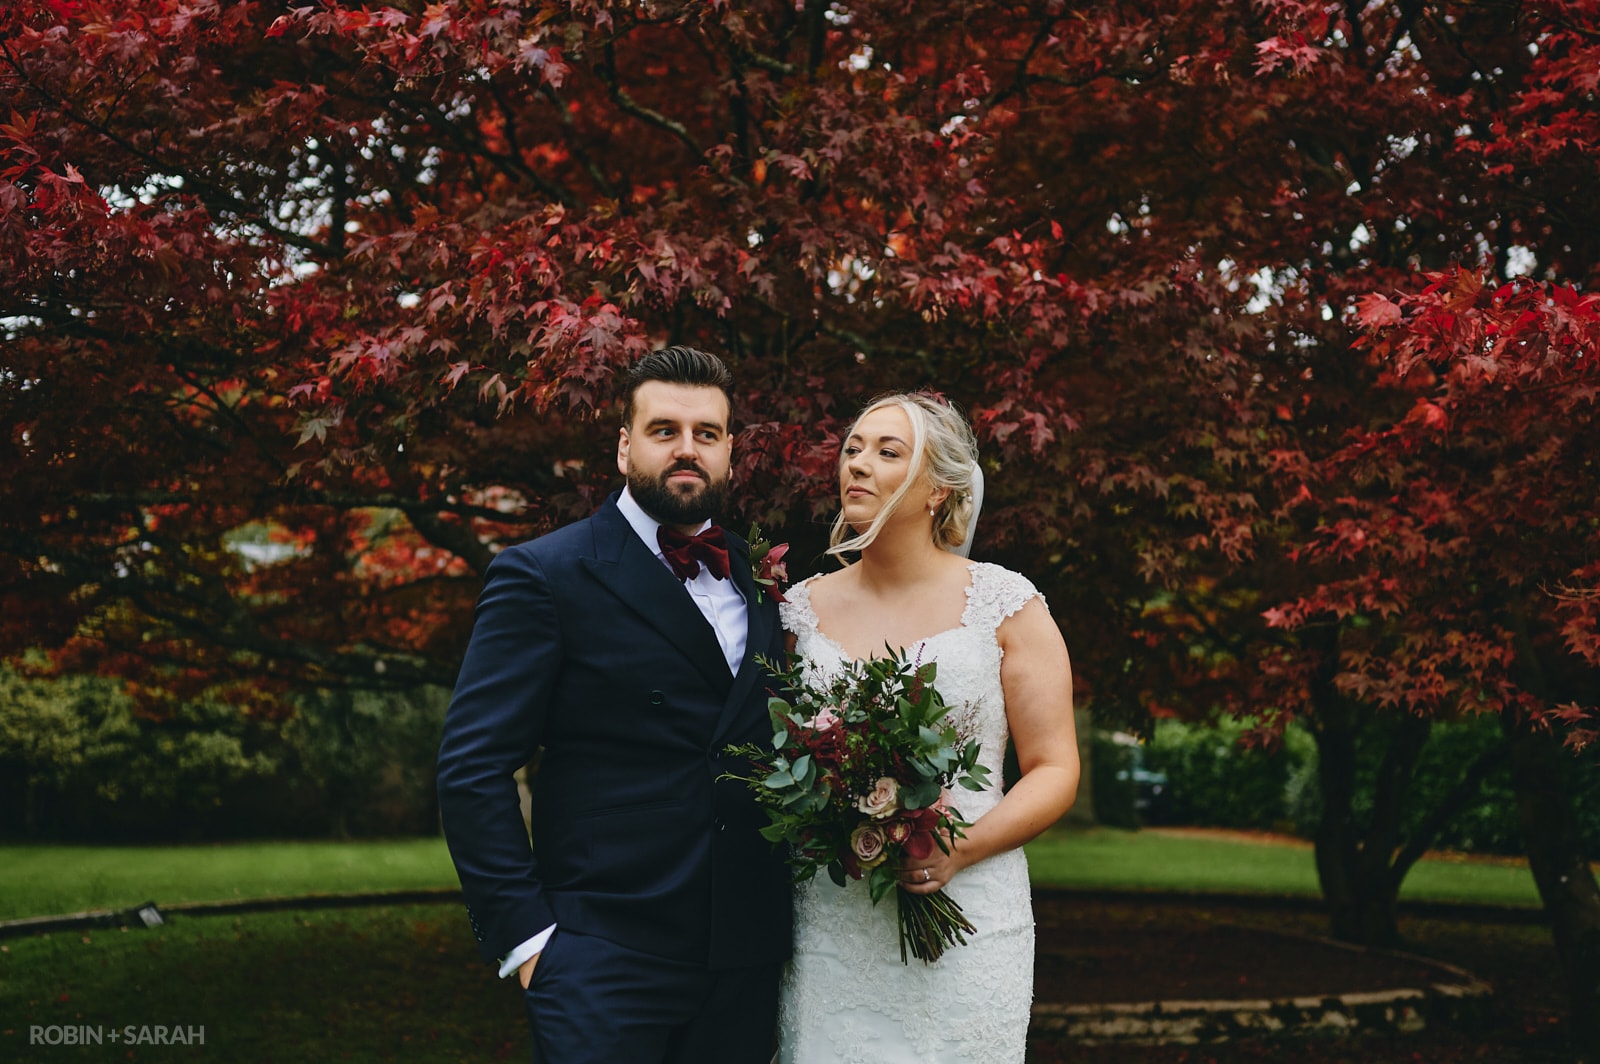 Bride and groom with playful expressions in front of beautiful red tree